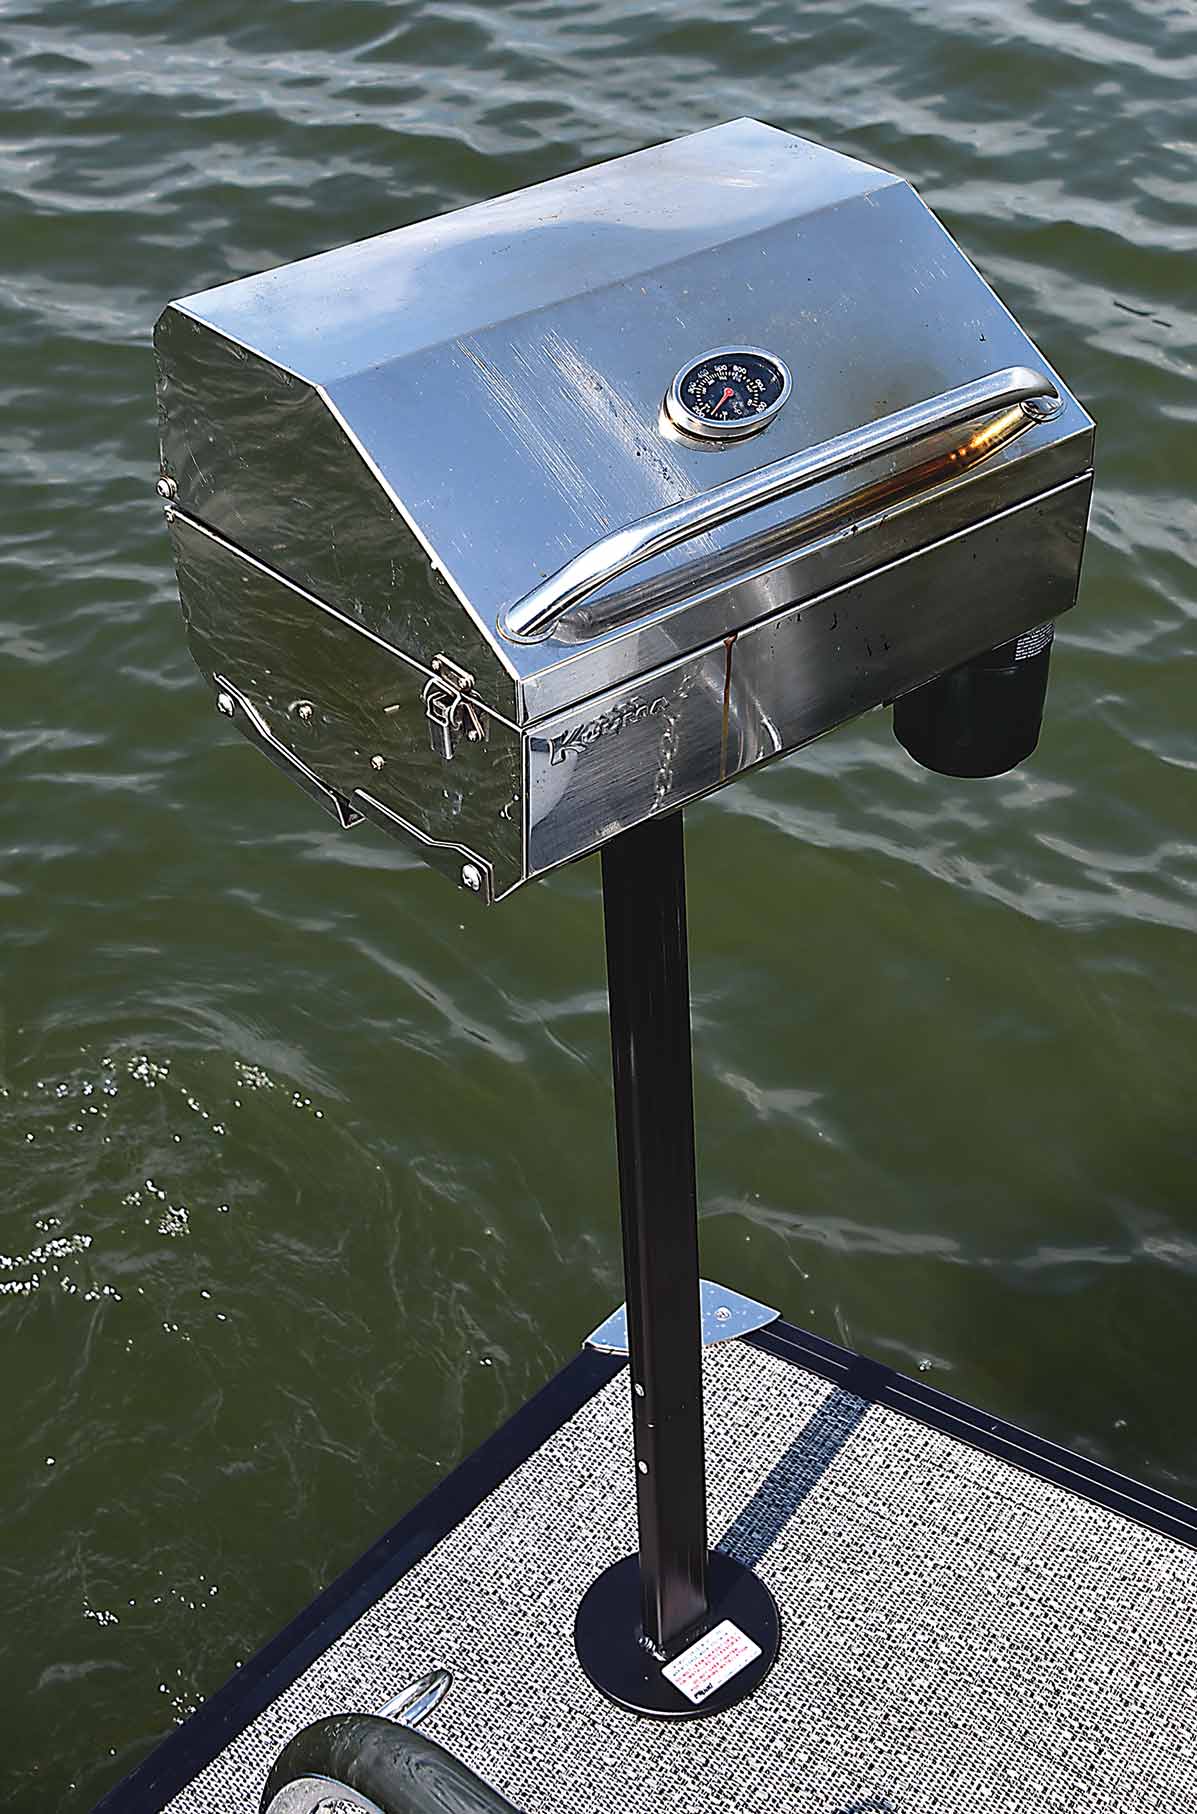 Close-up portrait photograph perspective of a closed small metal chrome colored mounted barbecue grill stand attached to the rear stern surface area of the pontoon boat motor vehicle (Lillipad Marine Flagpole/Grill Post)